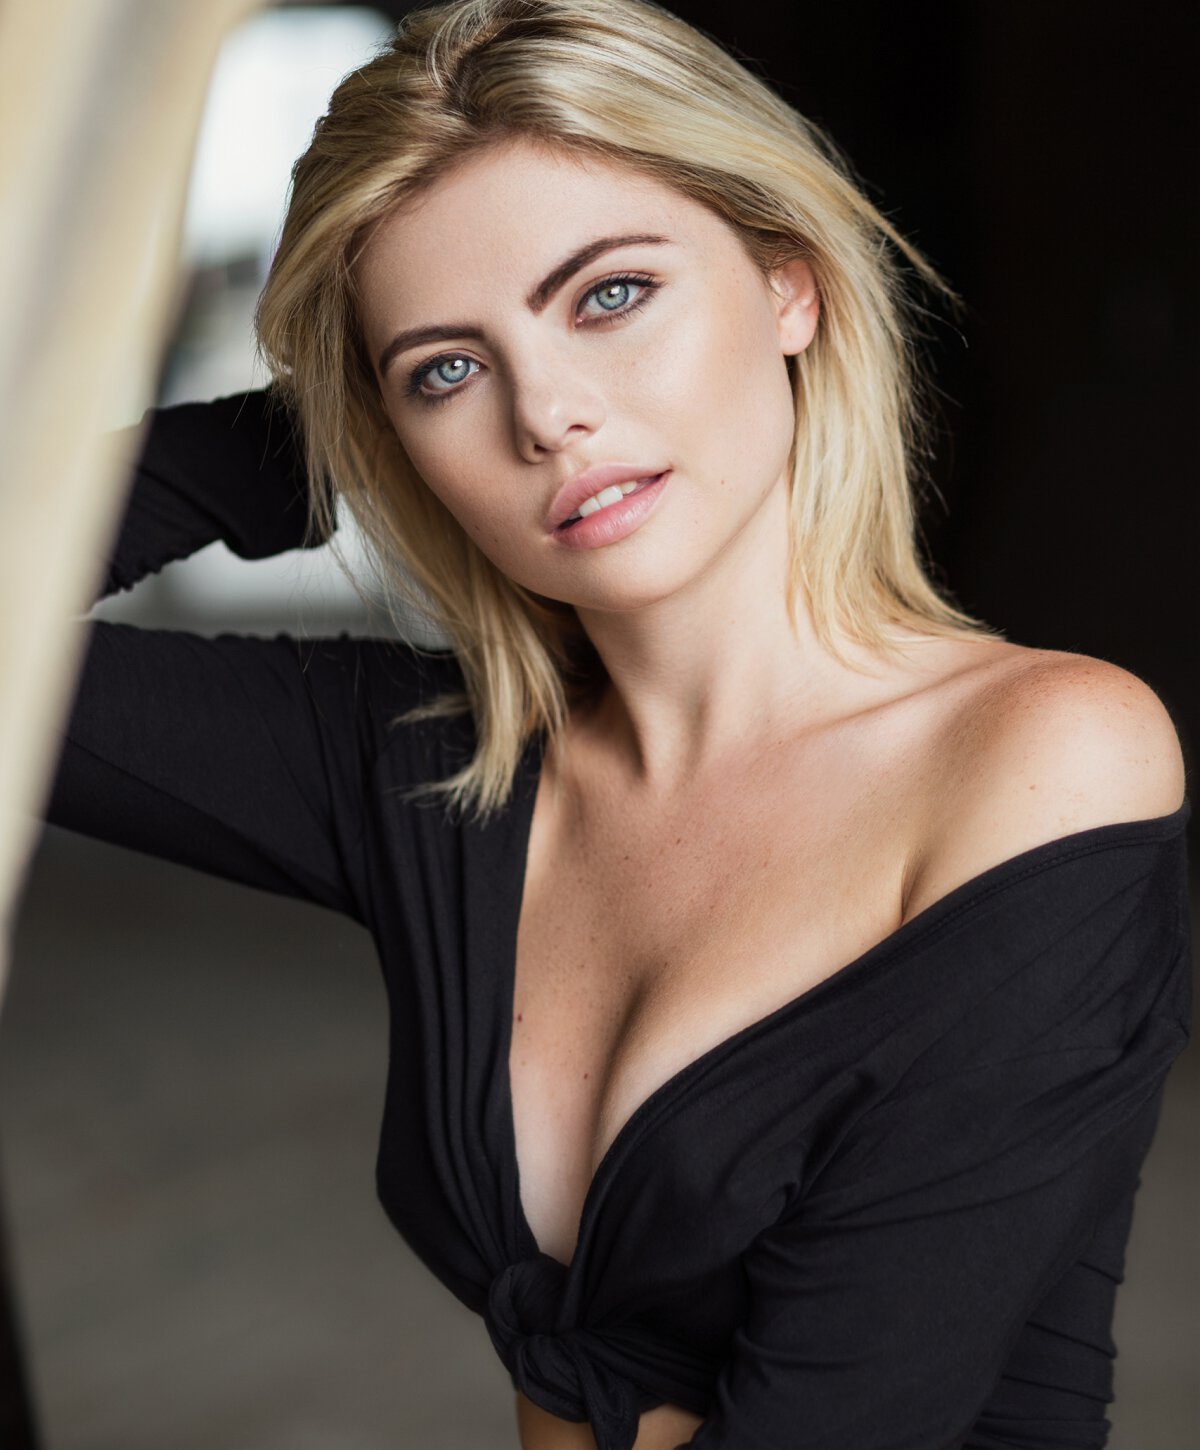 Chicago breast lift model with blonde hair